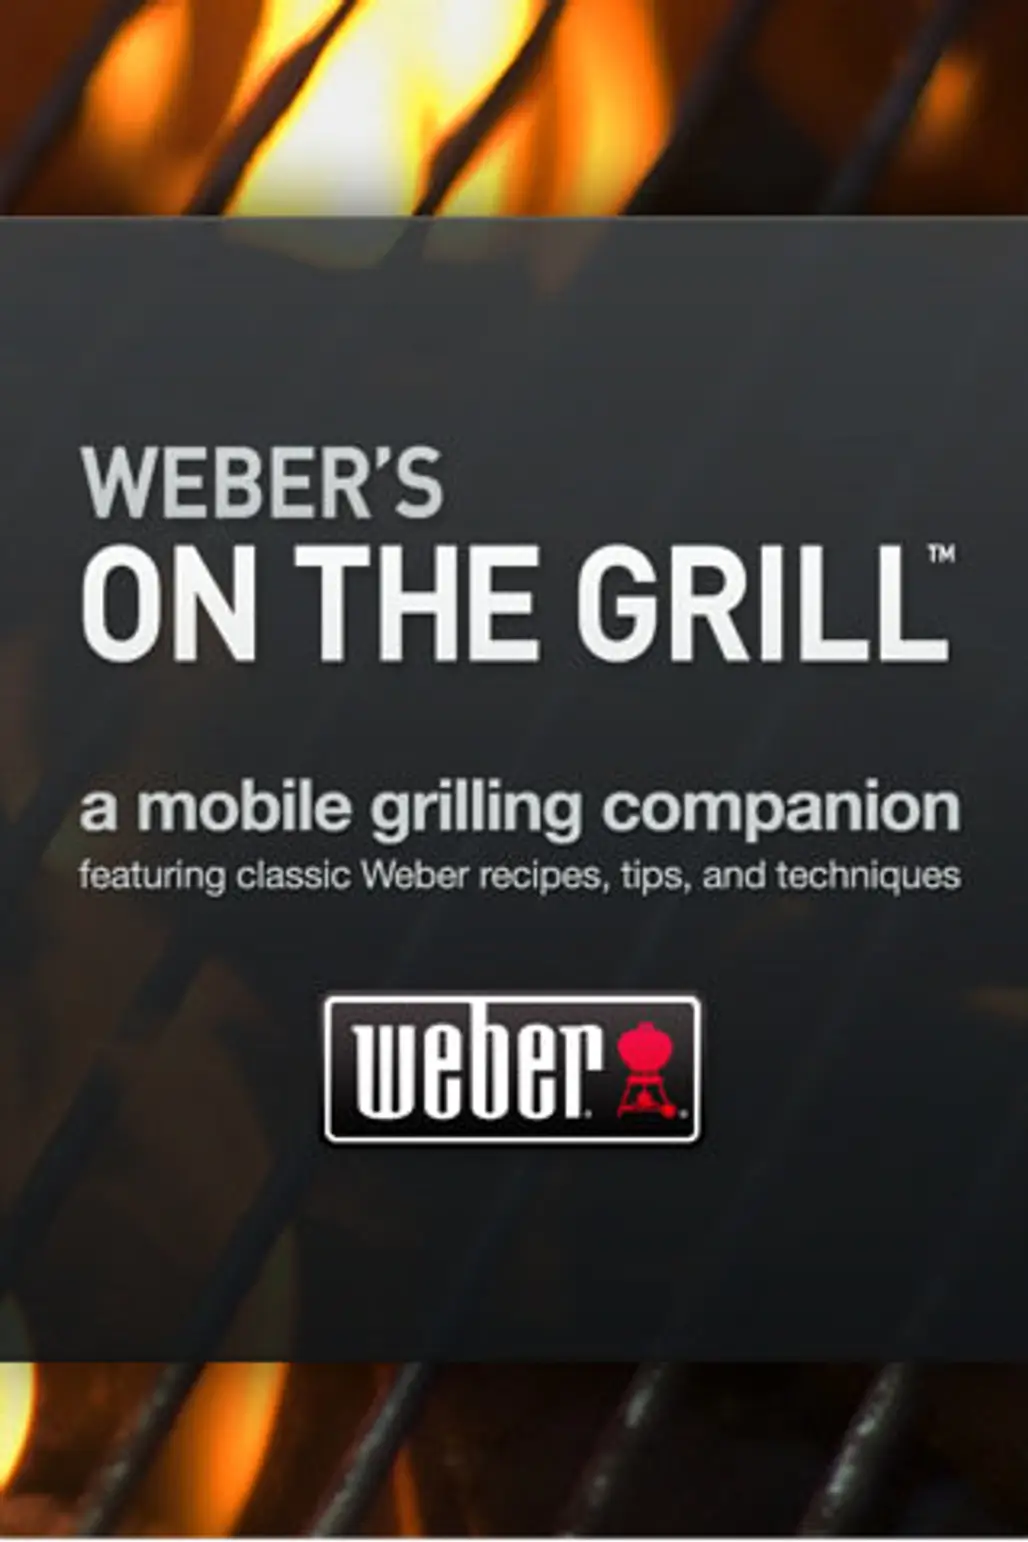 Weber’s on the Grill – by Weber-Stephen Products Co